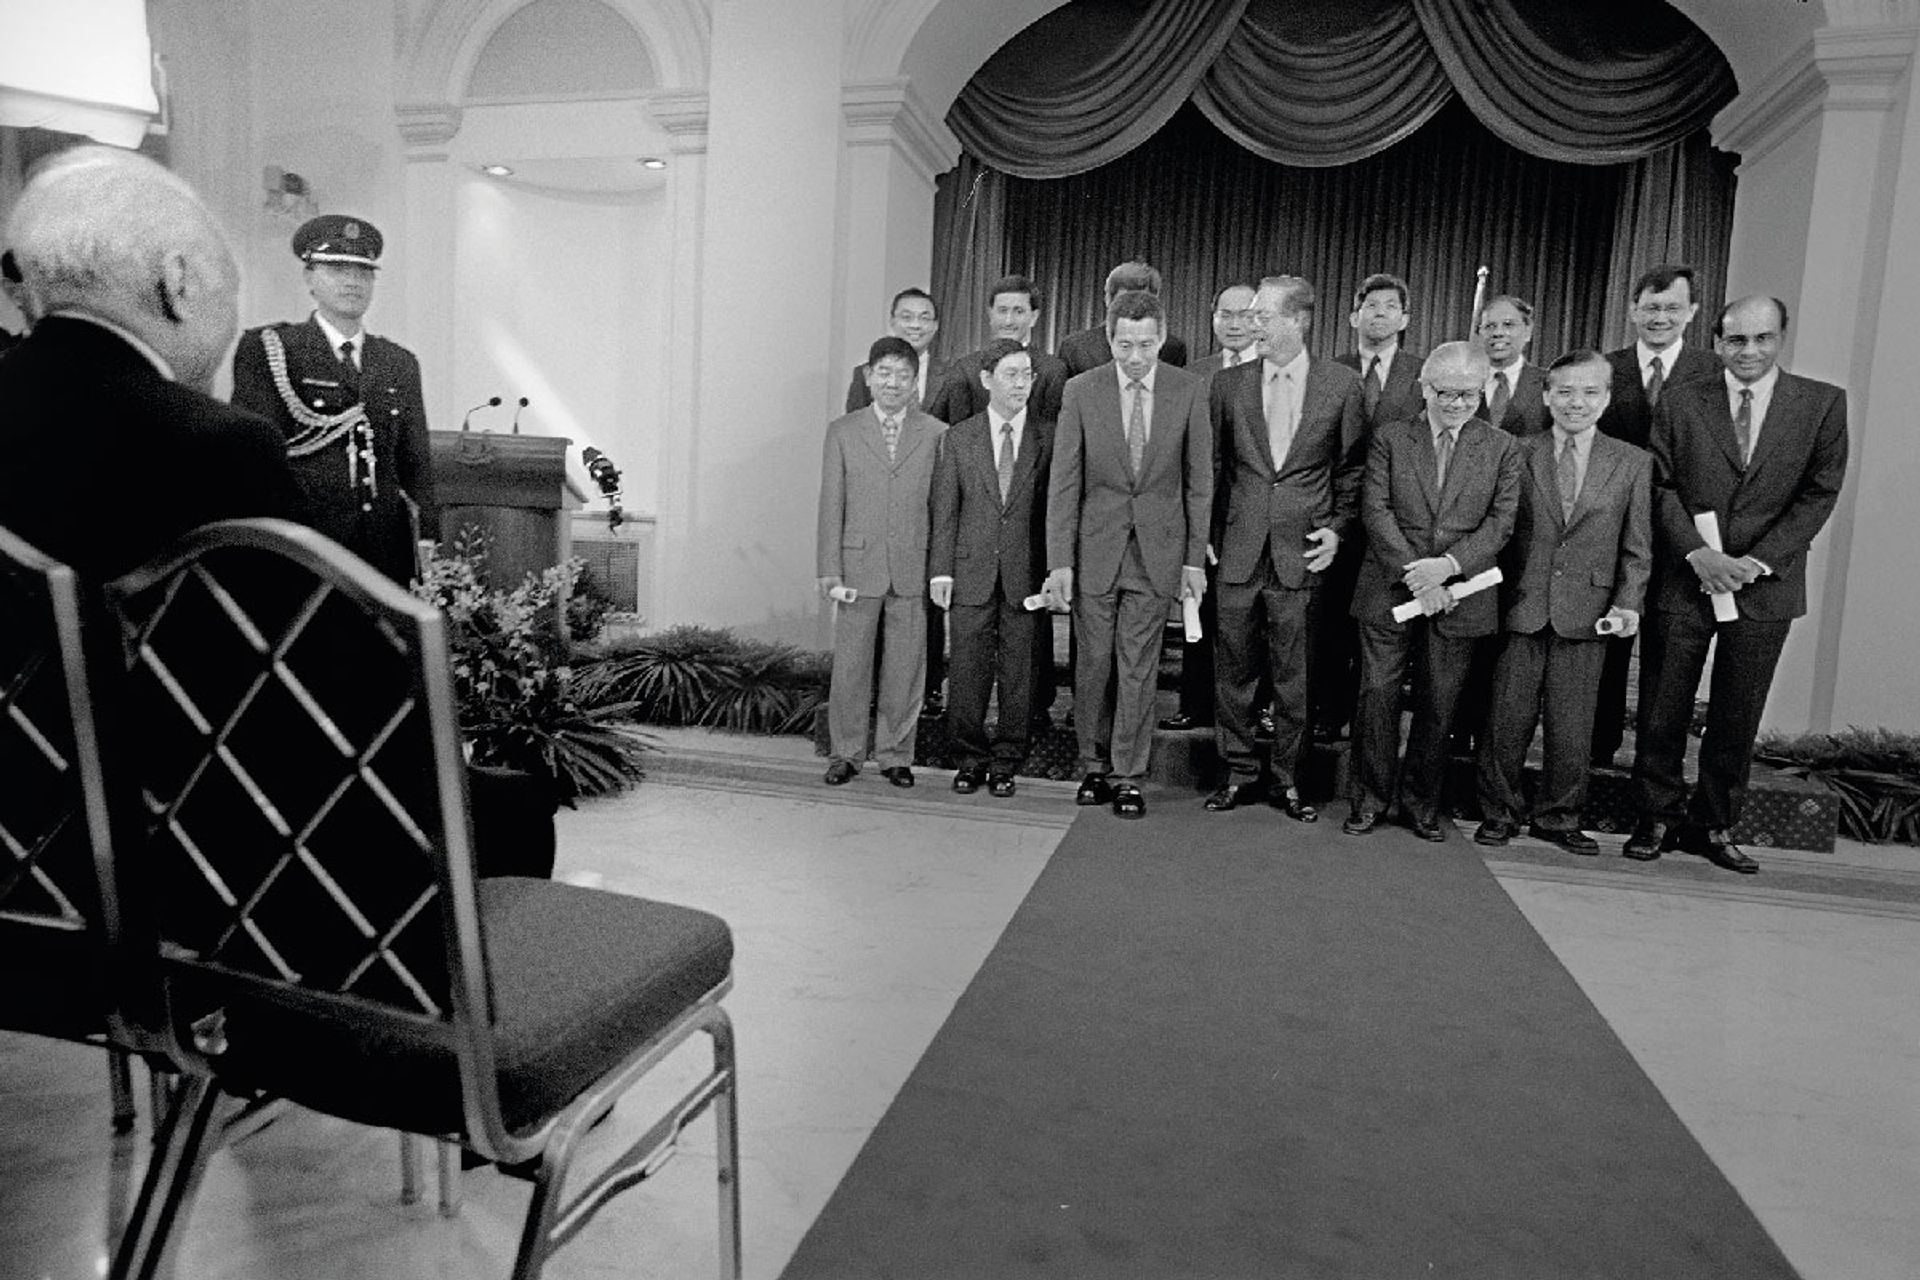 Taking their places for the camera: Mr Lee (seated) watching as his parliamentary colleagues arrange themselves for a photo after being sworn in on Nov 23, 2001. (First row from left) Senior Ministers of State Khaw Boon Wan and Matthias Yao, Deputy Prime Minister and Finance Minister Lee Hsien Loong, Prime Minister Goh Chok Tong, Deputy Prime Minister Tony Tan, Senior Ministers of State Ho Peng Kee and Tharman Shanmugaratnam. (Second row from left) Ministers of State Cedric Foo, Vivian Balakrishnan, Ng Eng Hen, Chan Soo Sen, Yaacob Ibrahim, Balaji Sadasivan and Raymond Lim. ST Photo: George Gascon